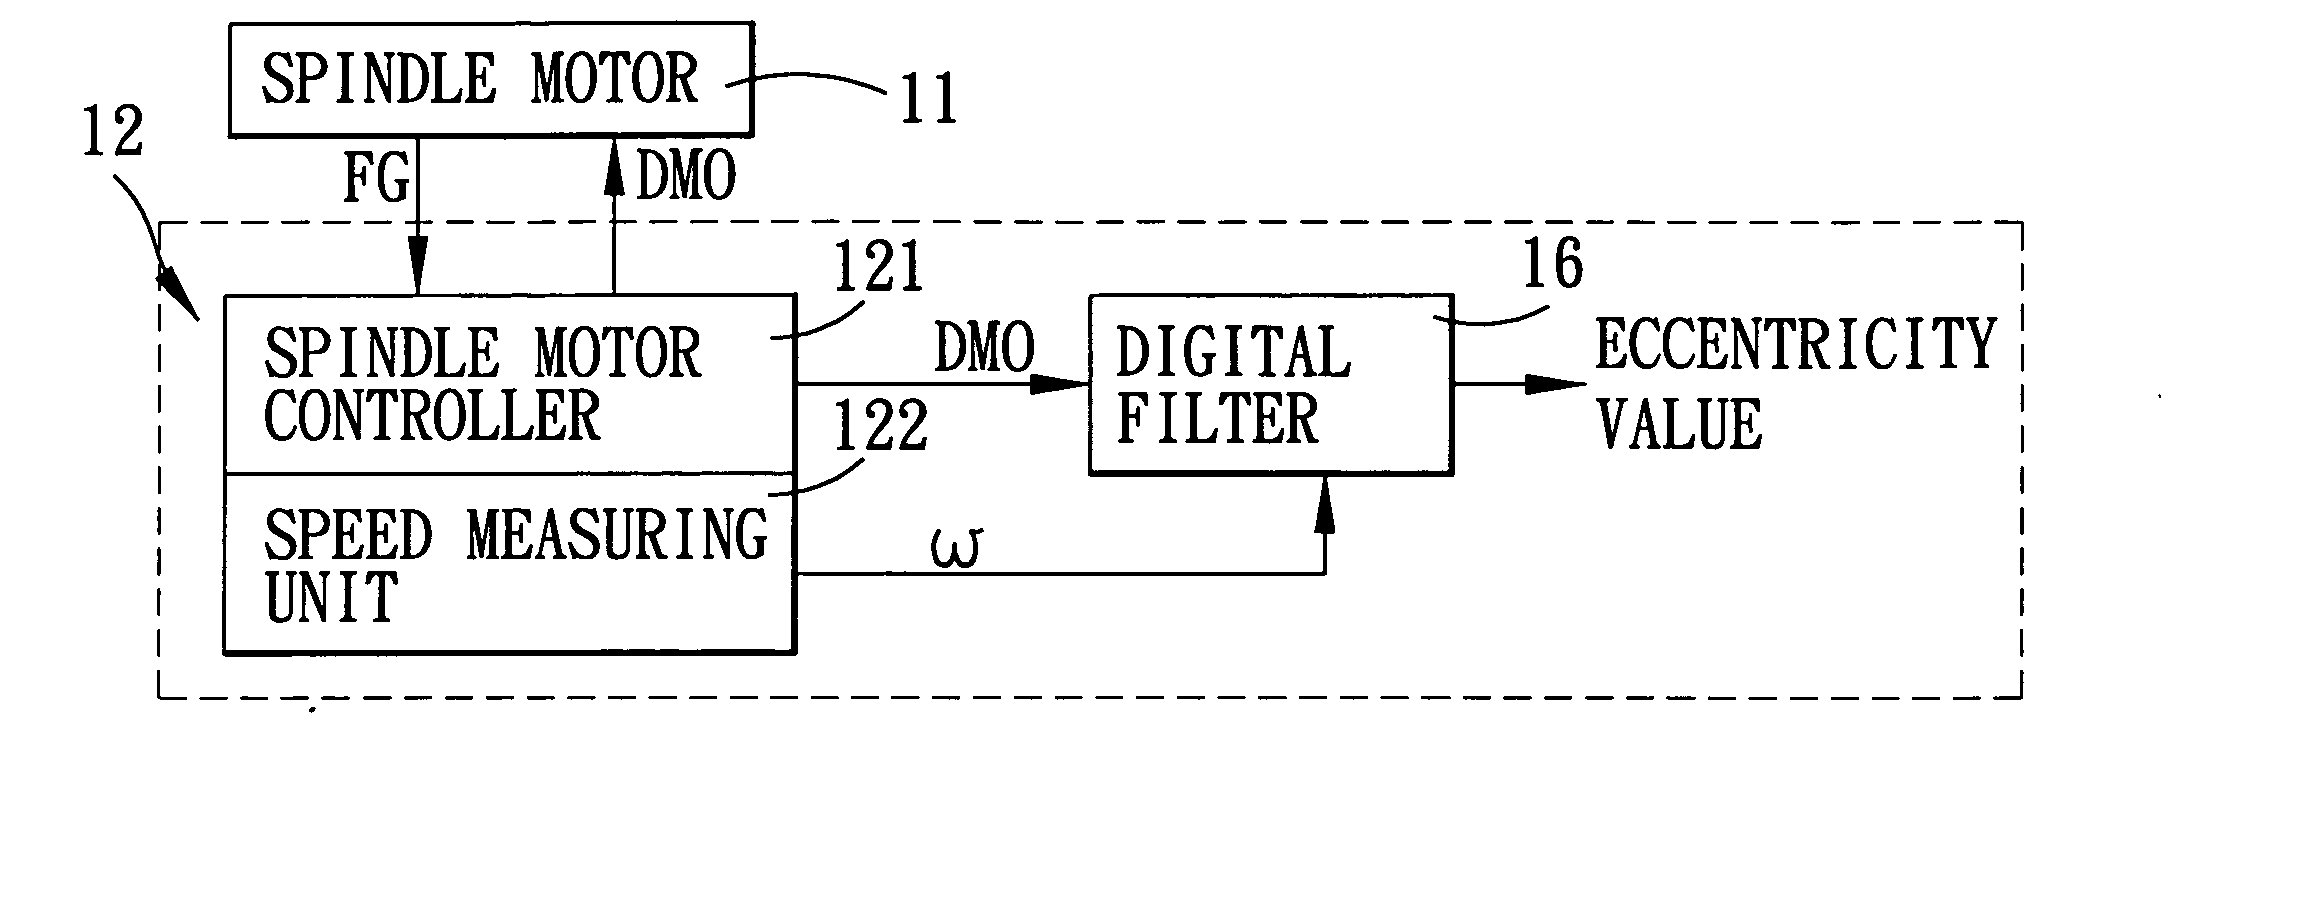 Method for detecting eccentricity of an optical disc, and optical disc drive that performs the method